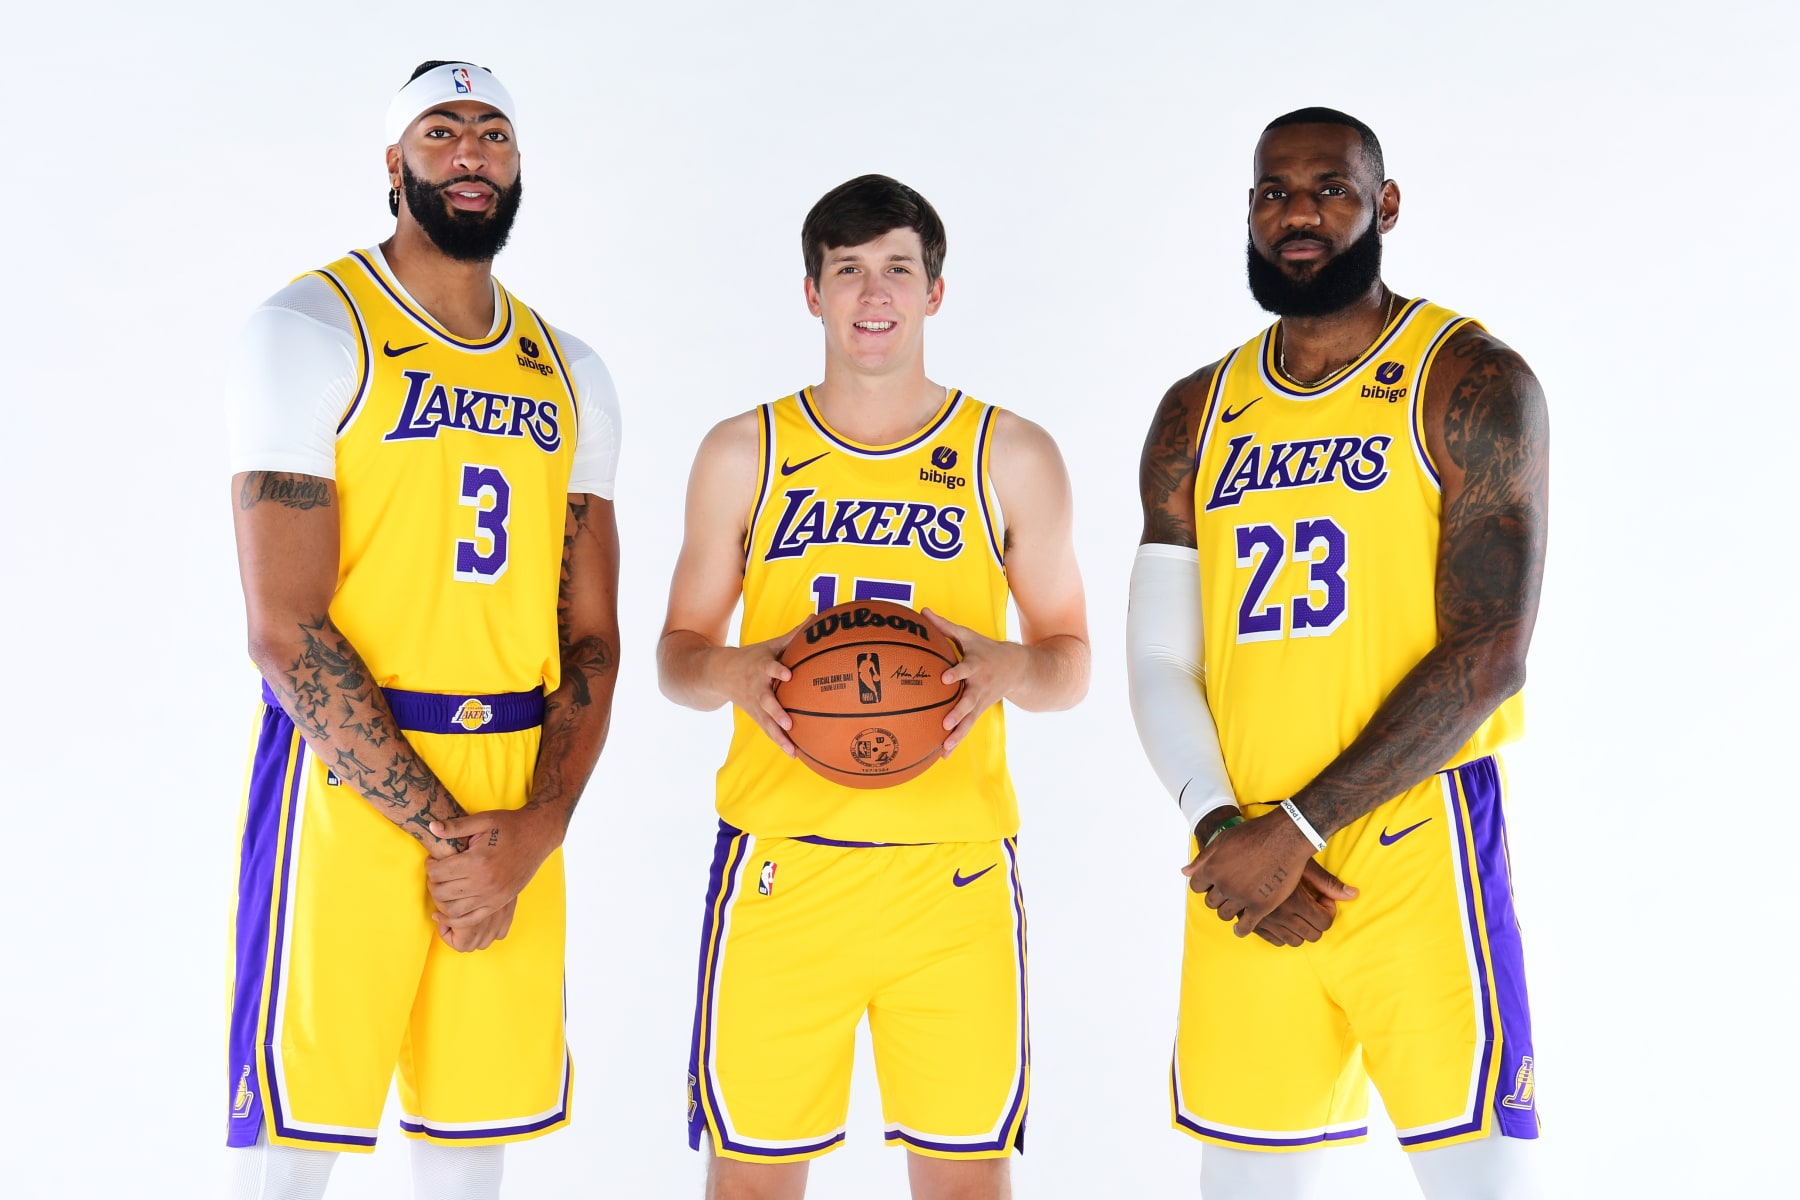 Jersey #3 - All Things Lakers - Los Angeles Times